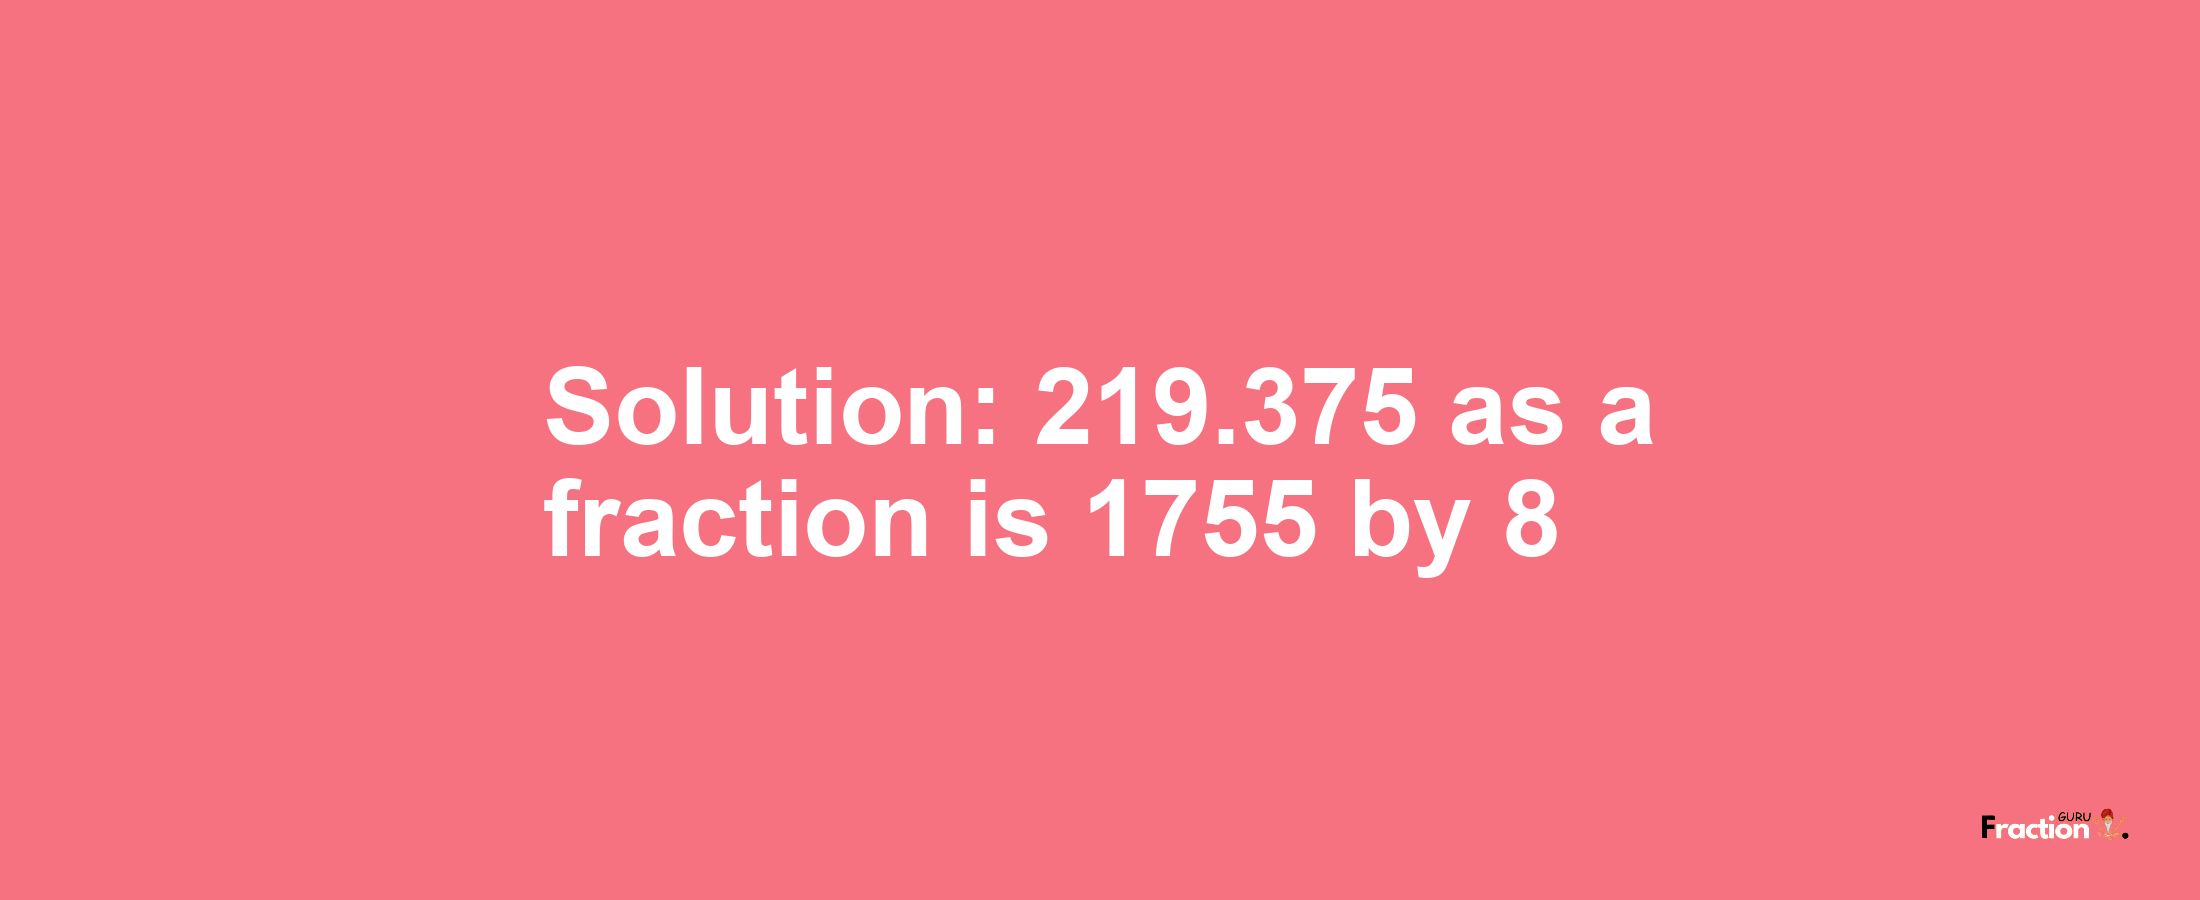 Solution:219.375 as a fraction is 1755/8